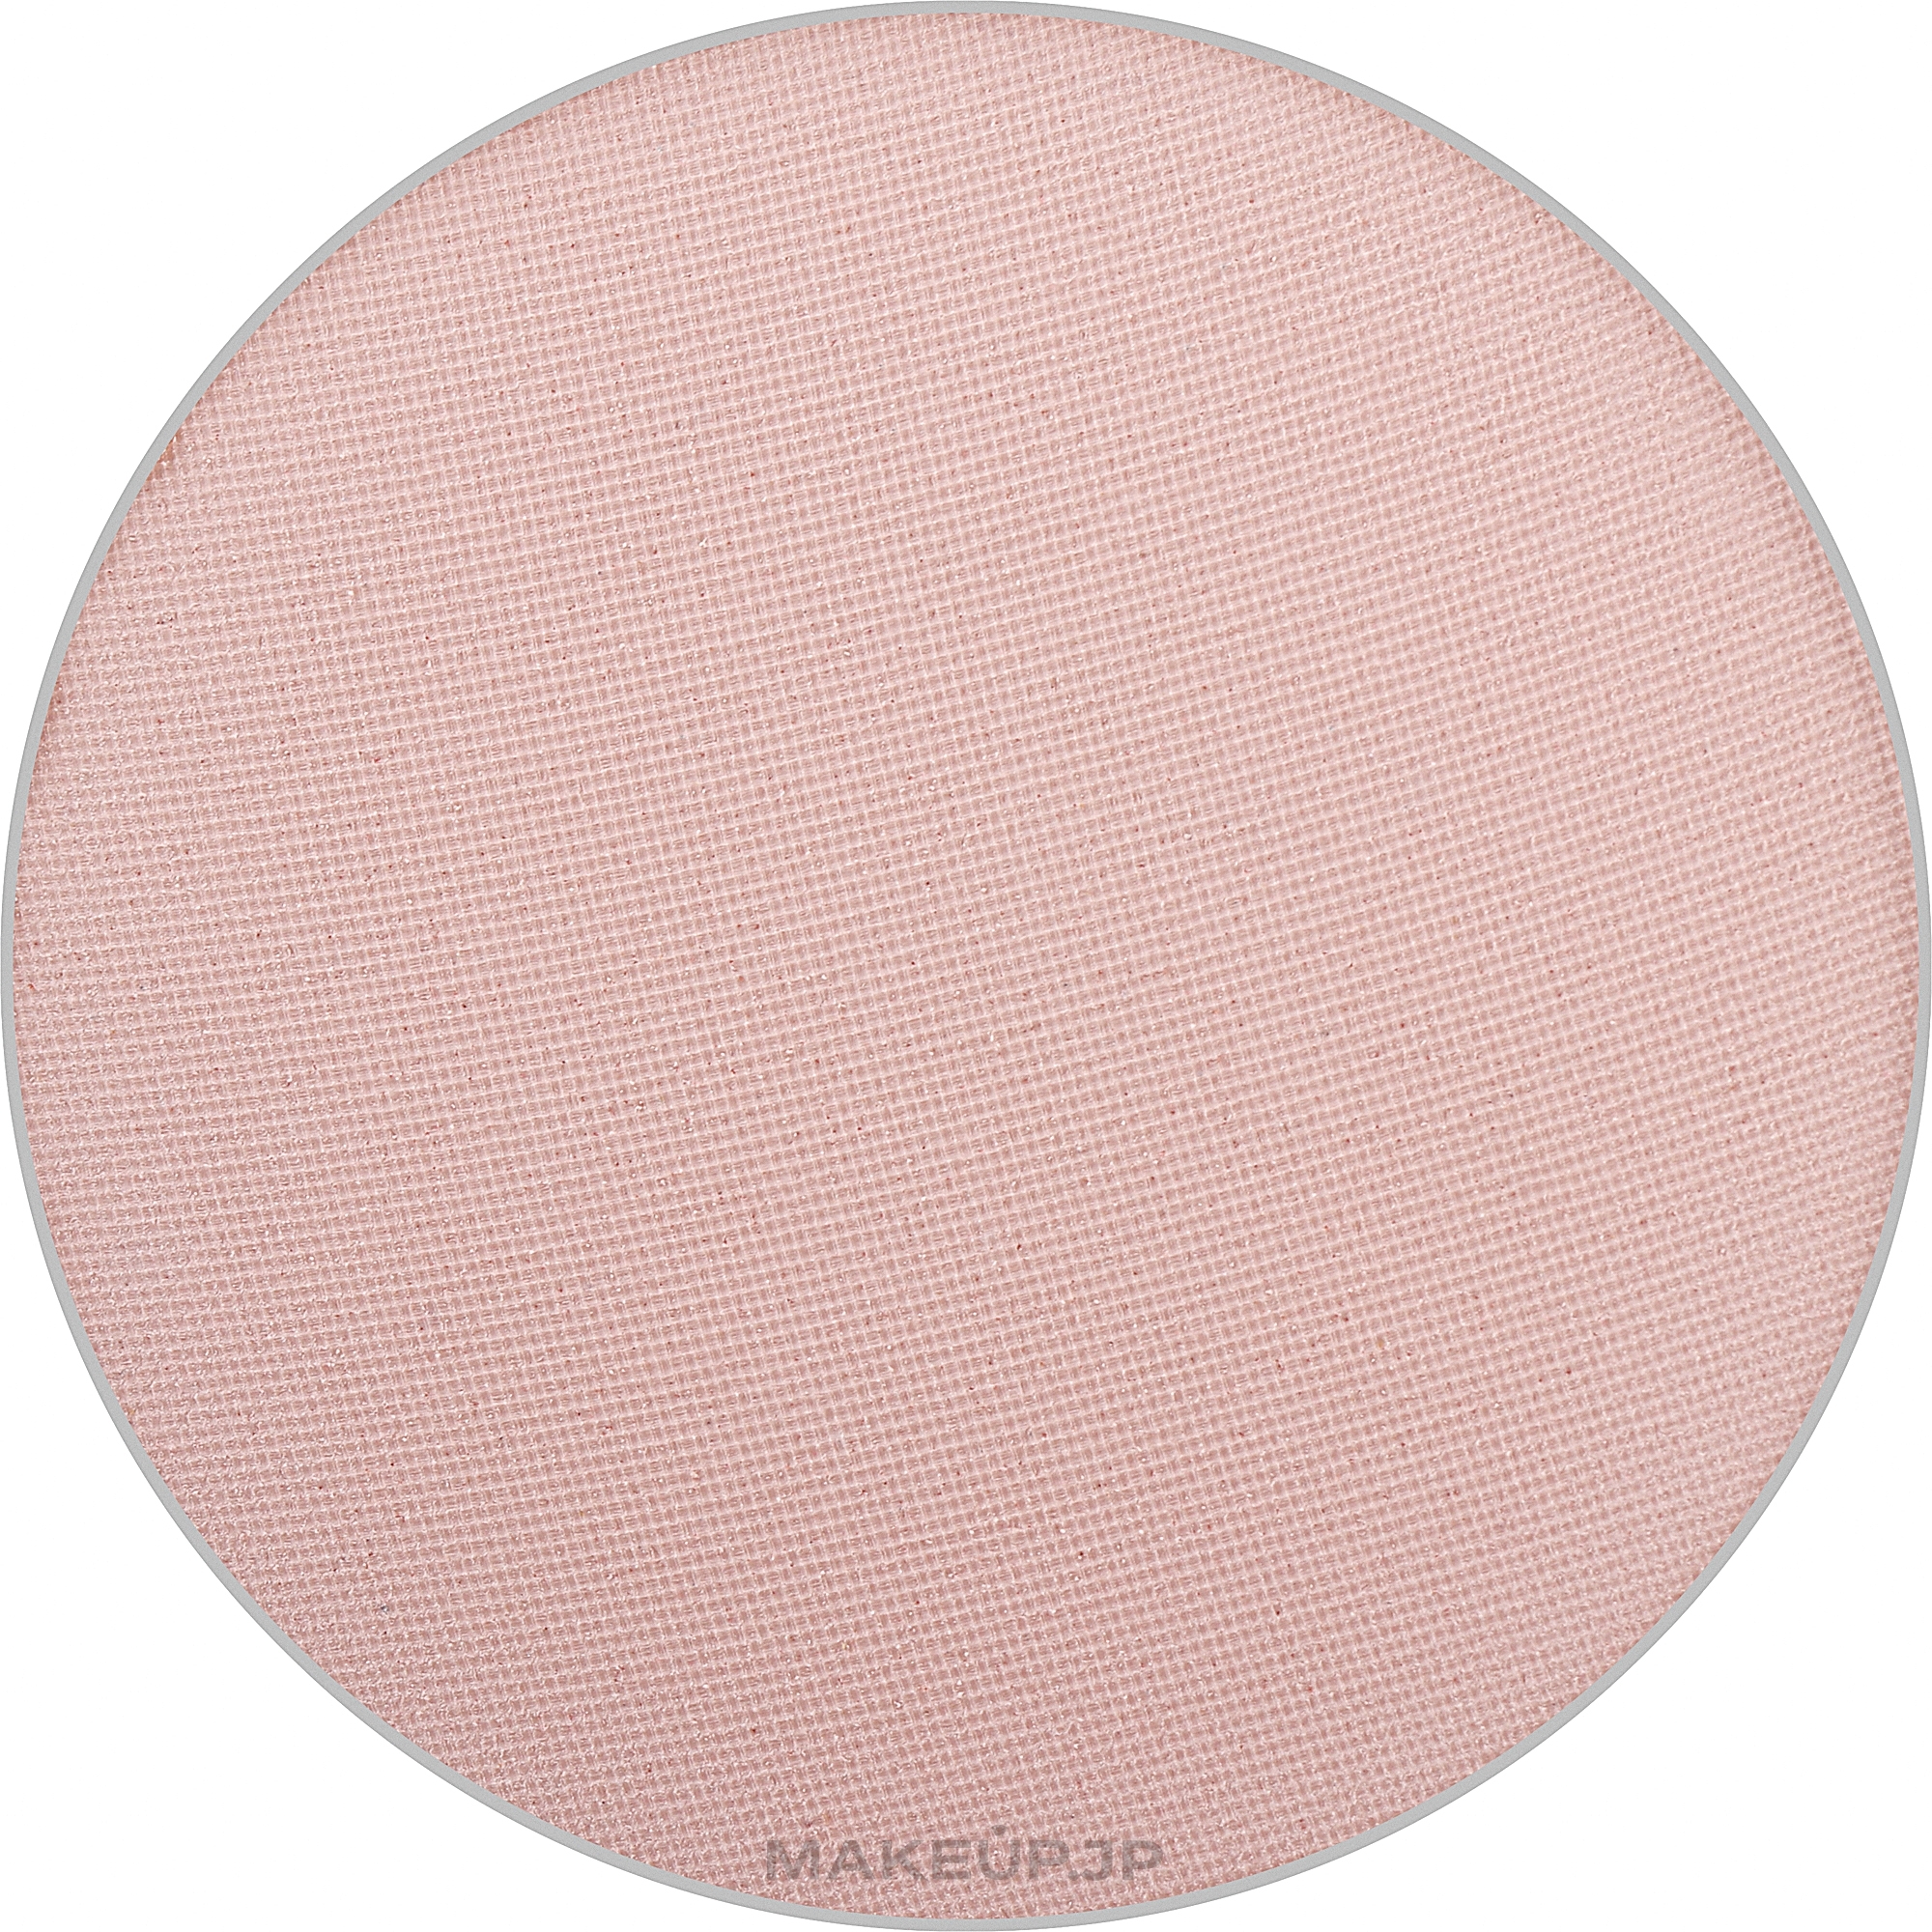 Compact Powder - Lord & Berry Pressed Powder (refill) — photo #8105